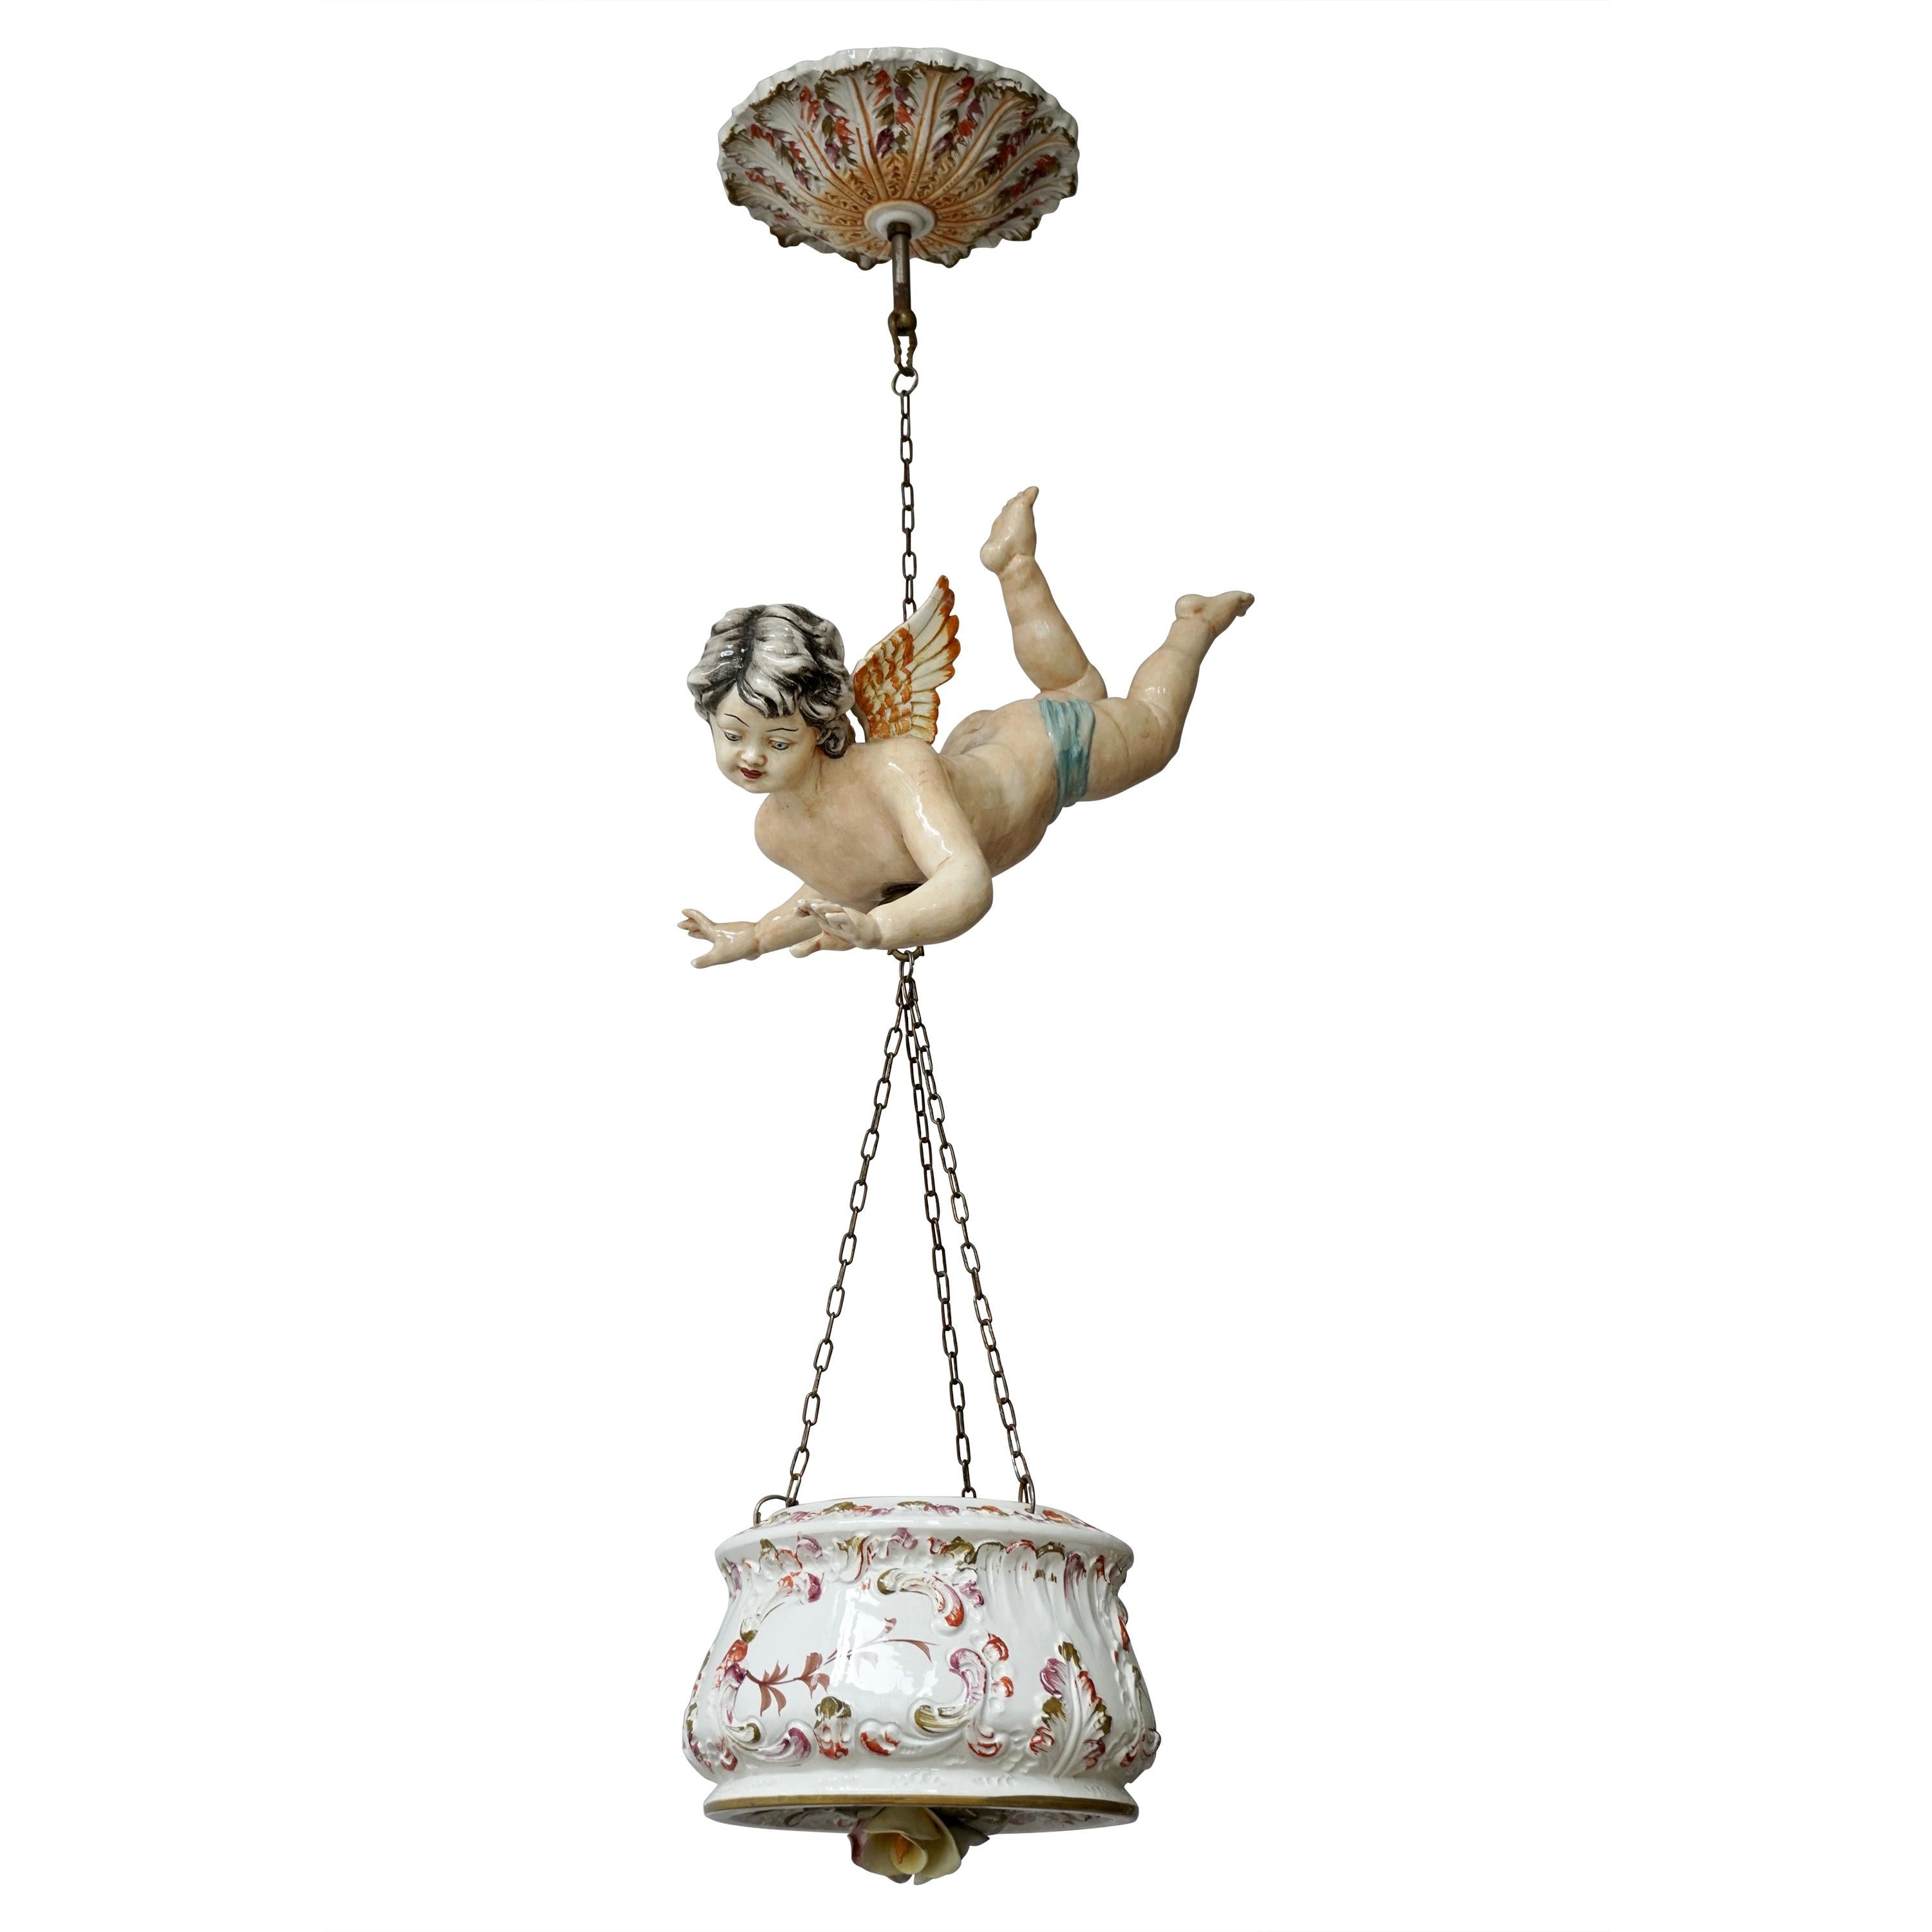 Porcelain Hanging Planter/Jardinière with Winged Putti